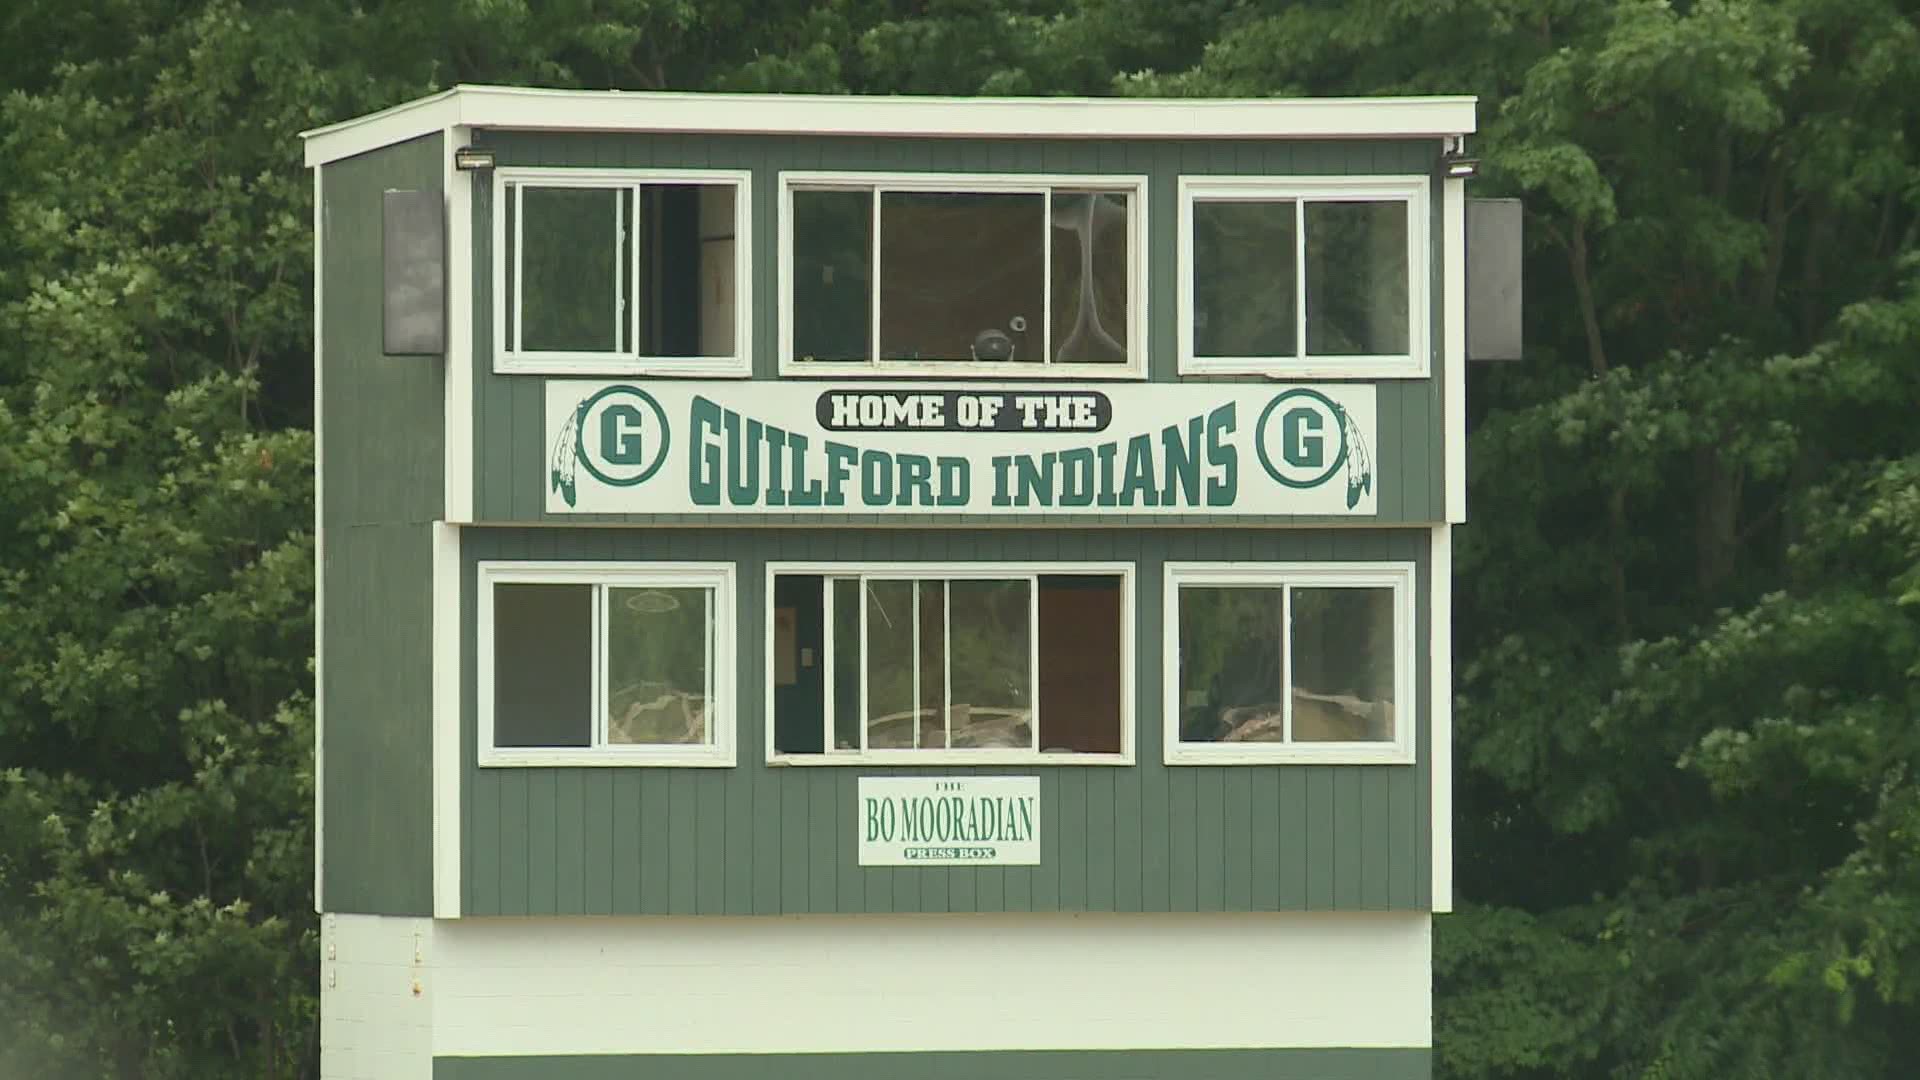 The decision from the Guilford Board of Education to remove the Indian mascot from Guilford Public Schools was unanimous.